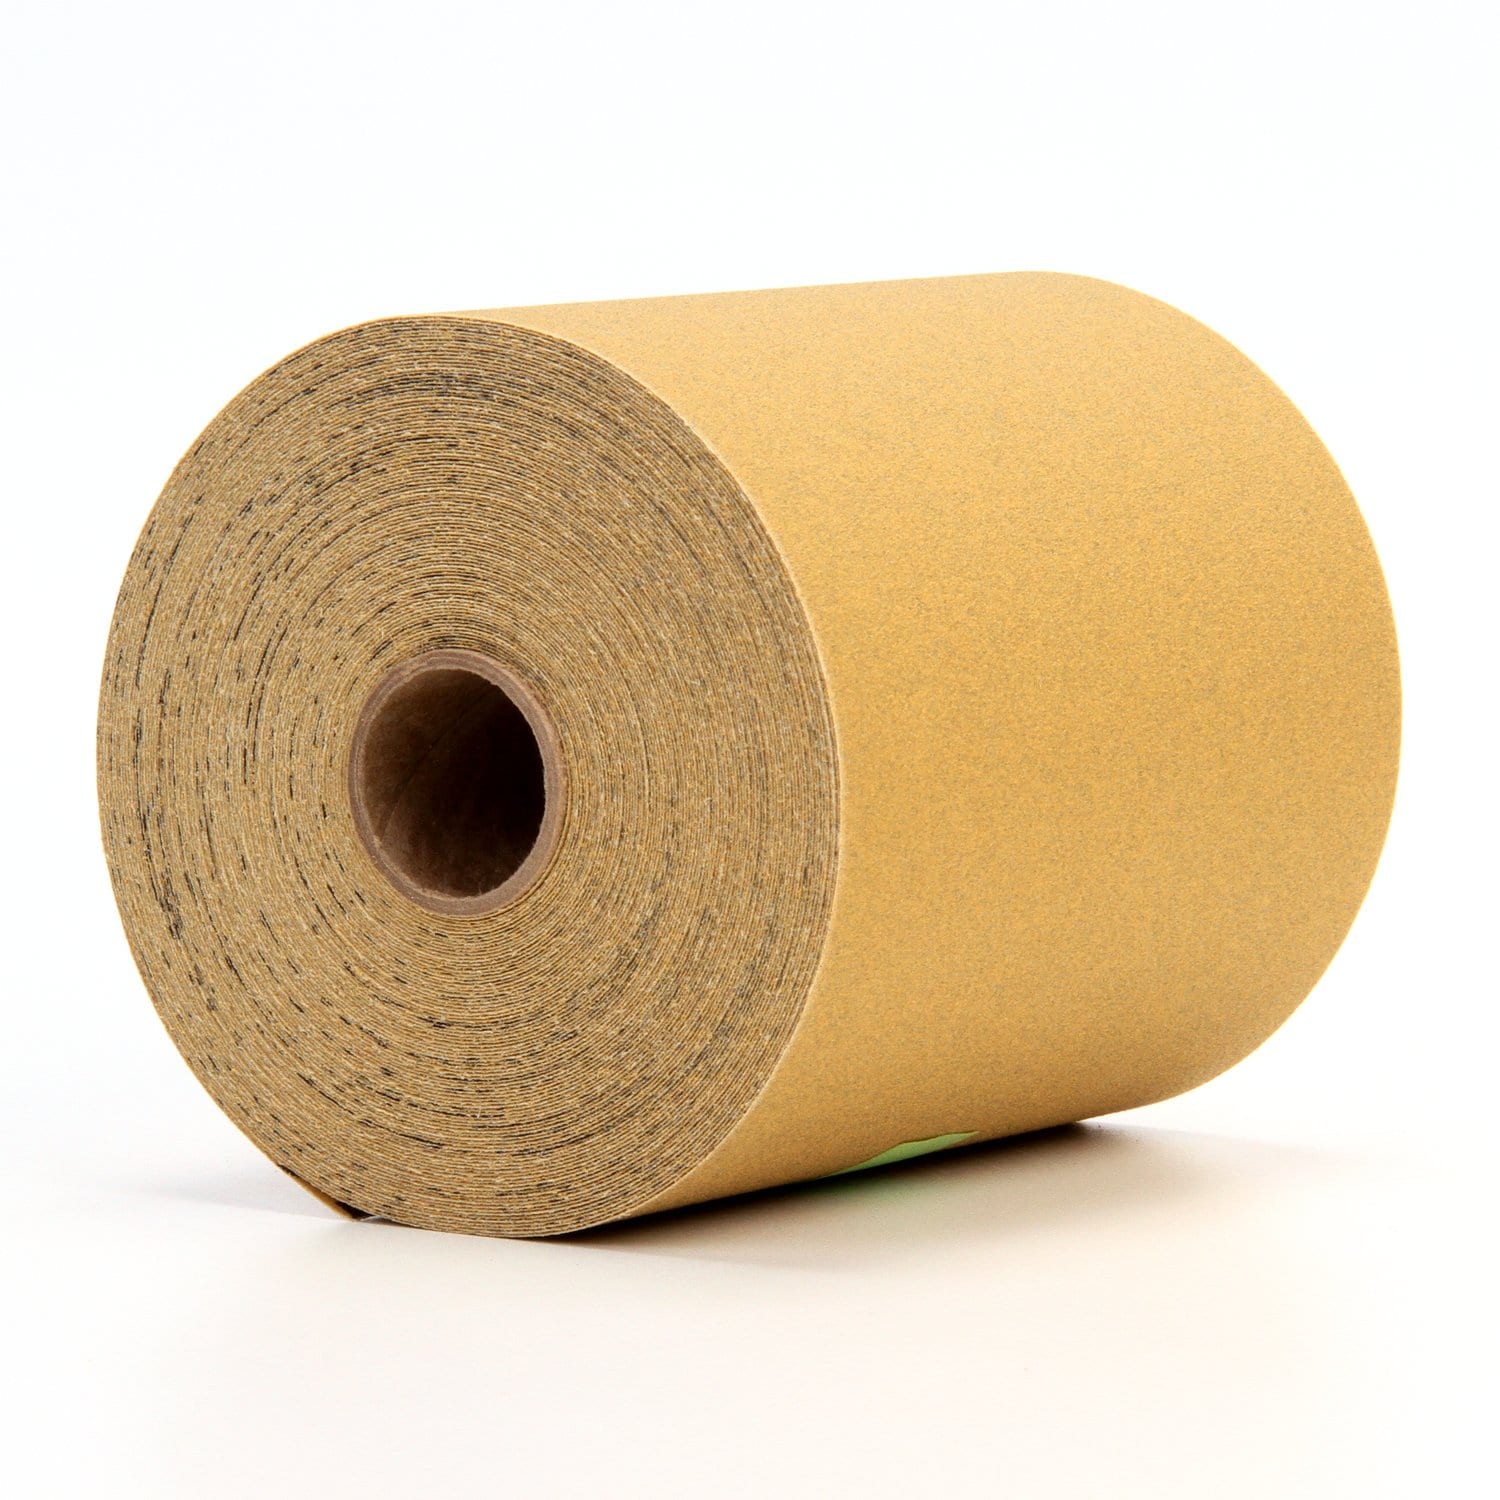 7100093588 - 3M Stikit Paper Roll 236U, P500 C-weight, Config